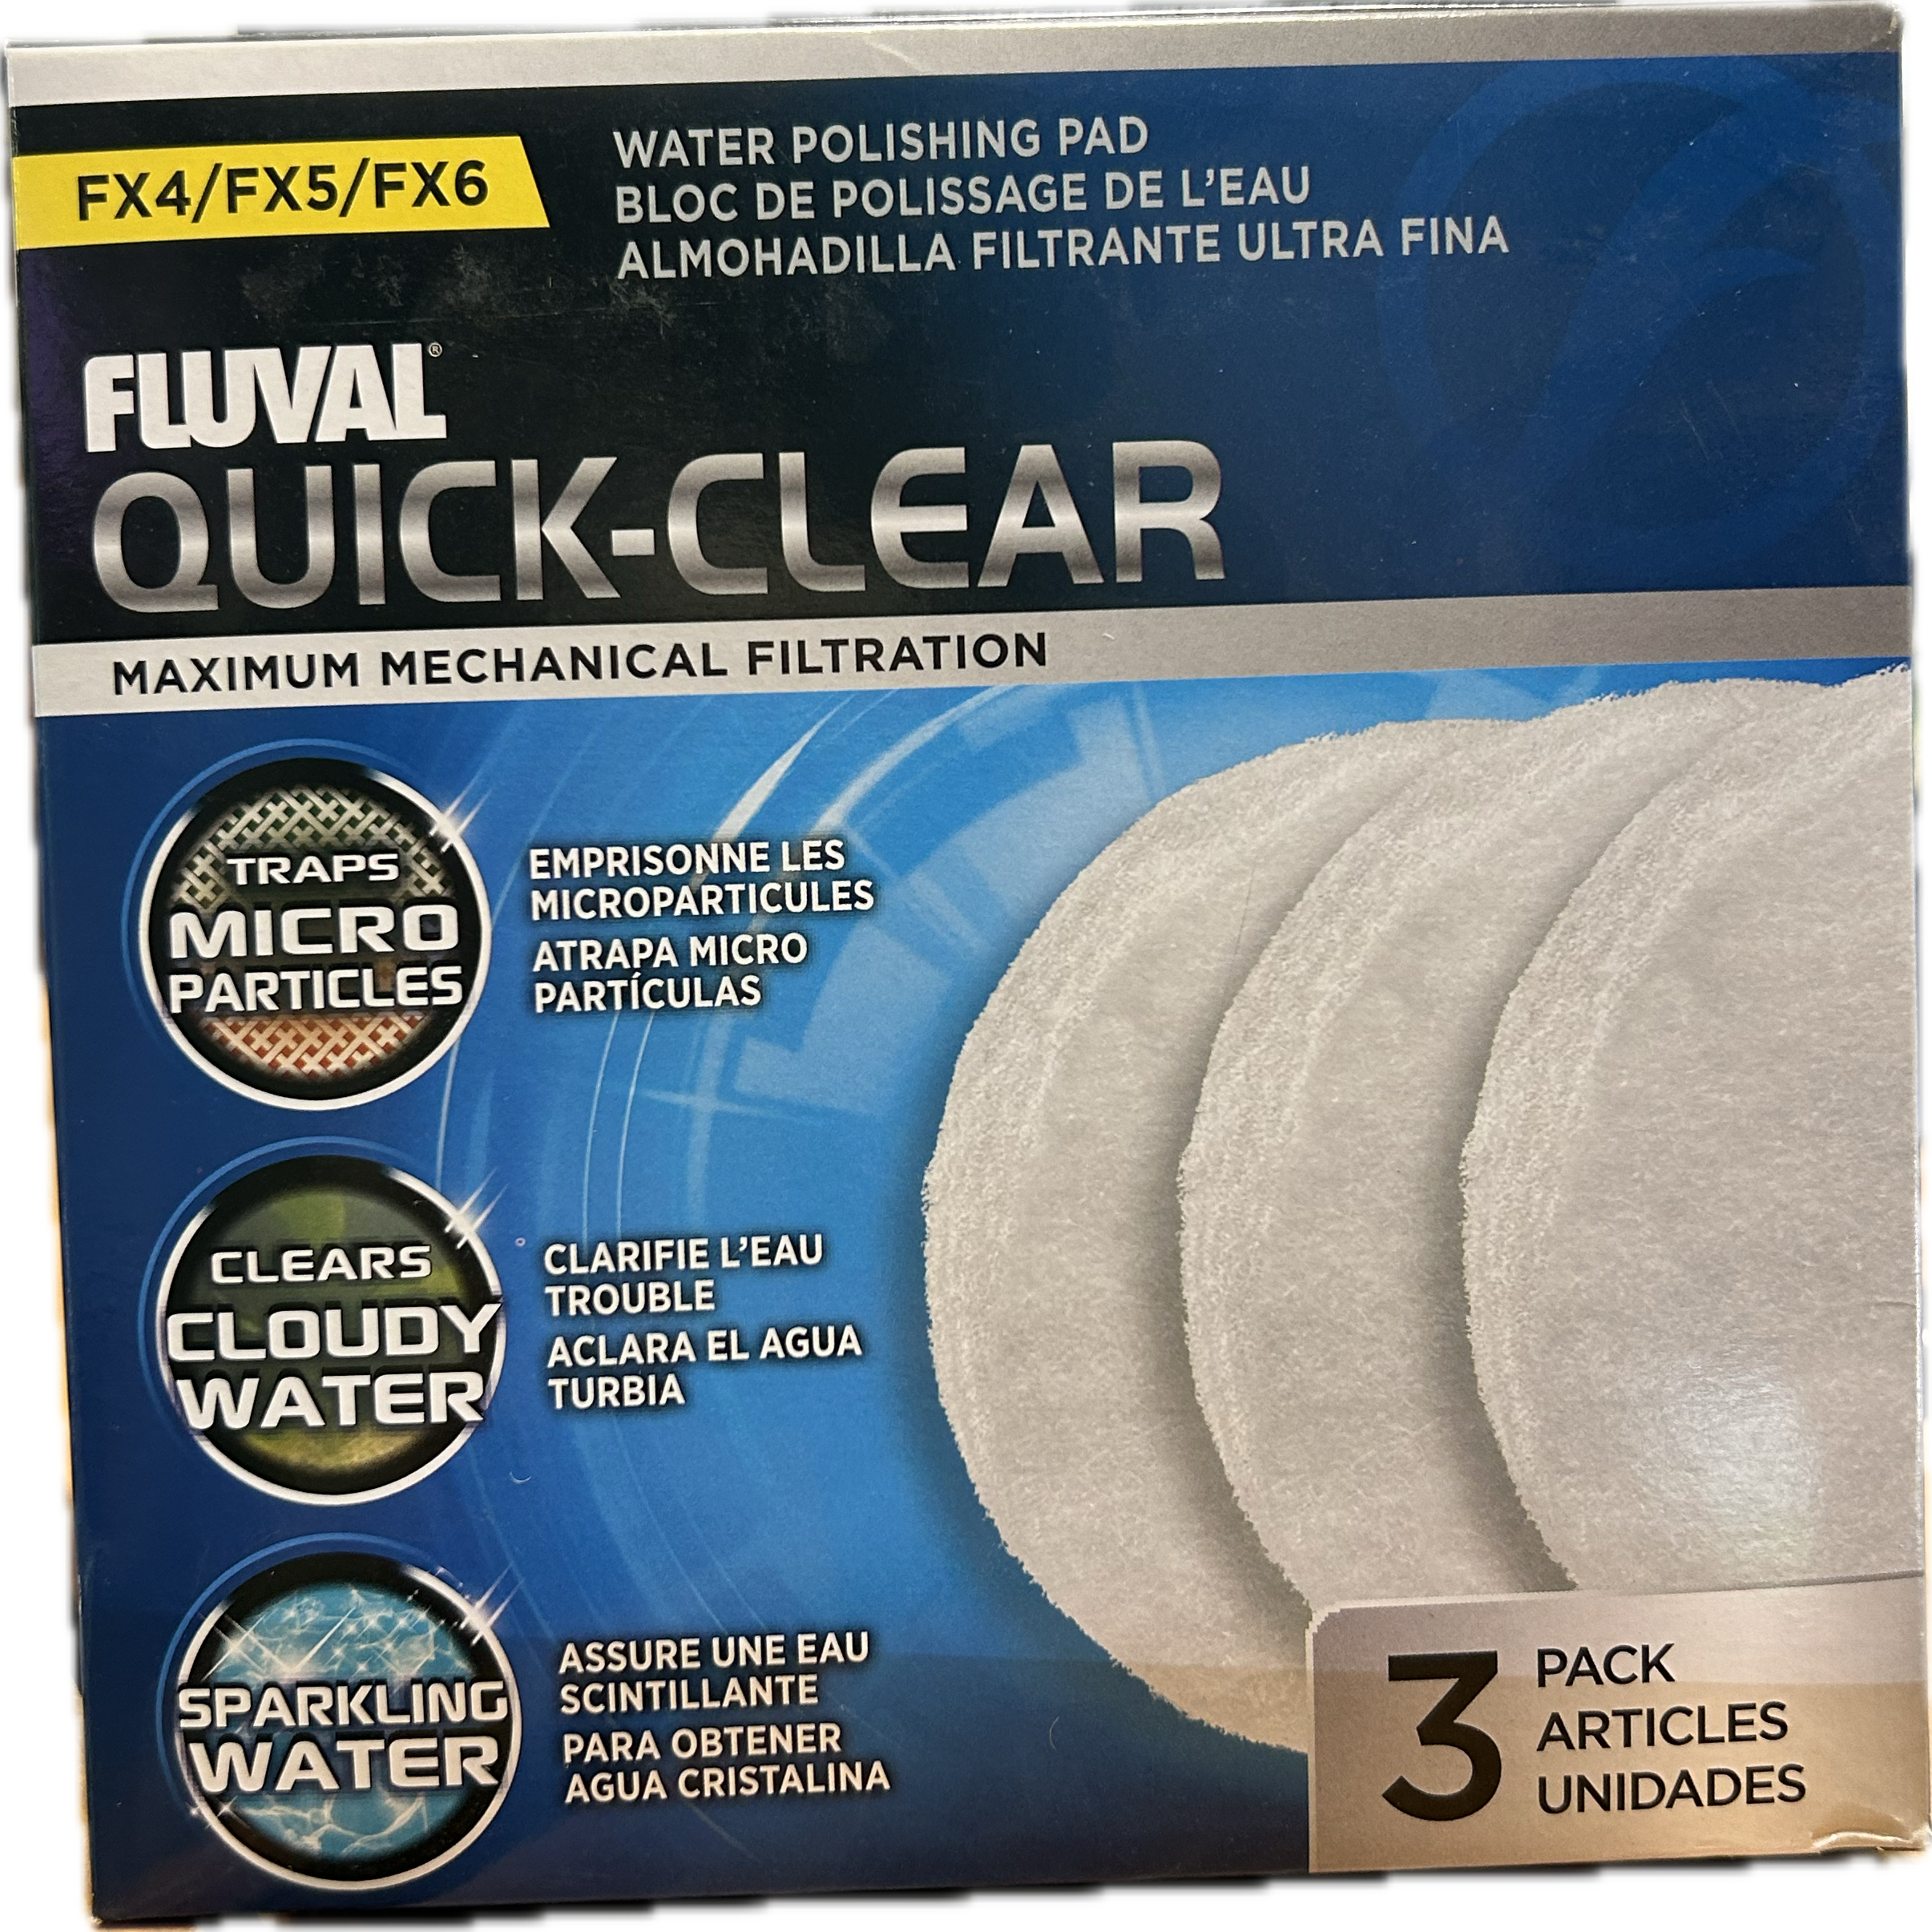 Fluval FX Series Water Polishing Pads